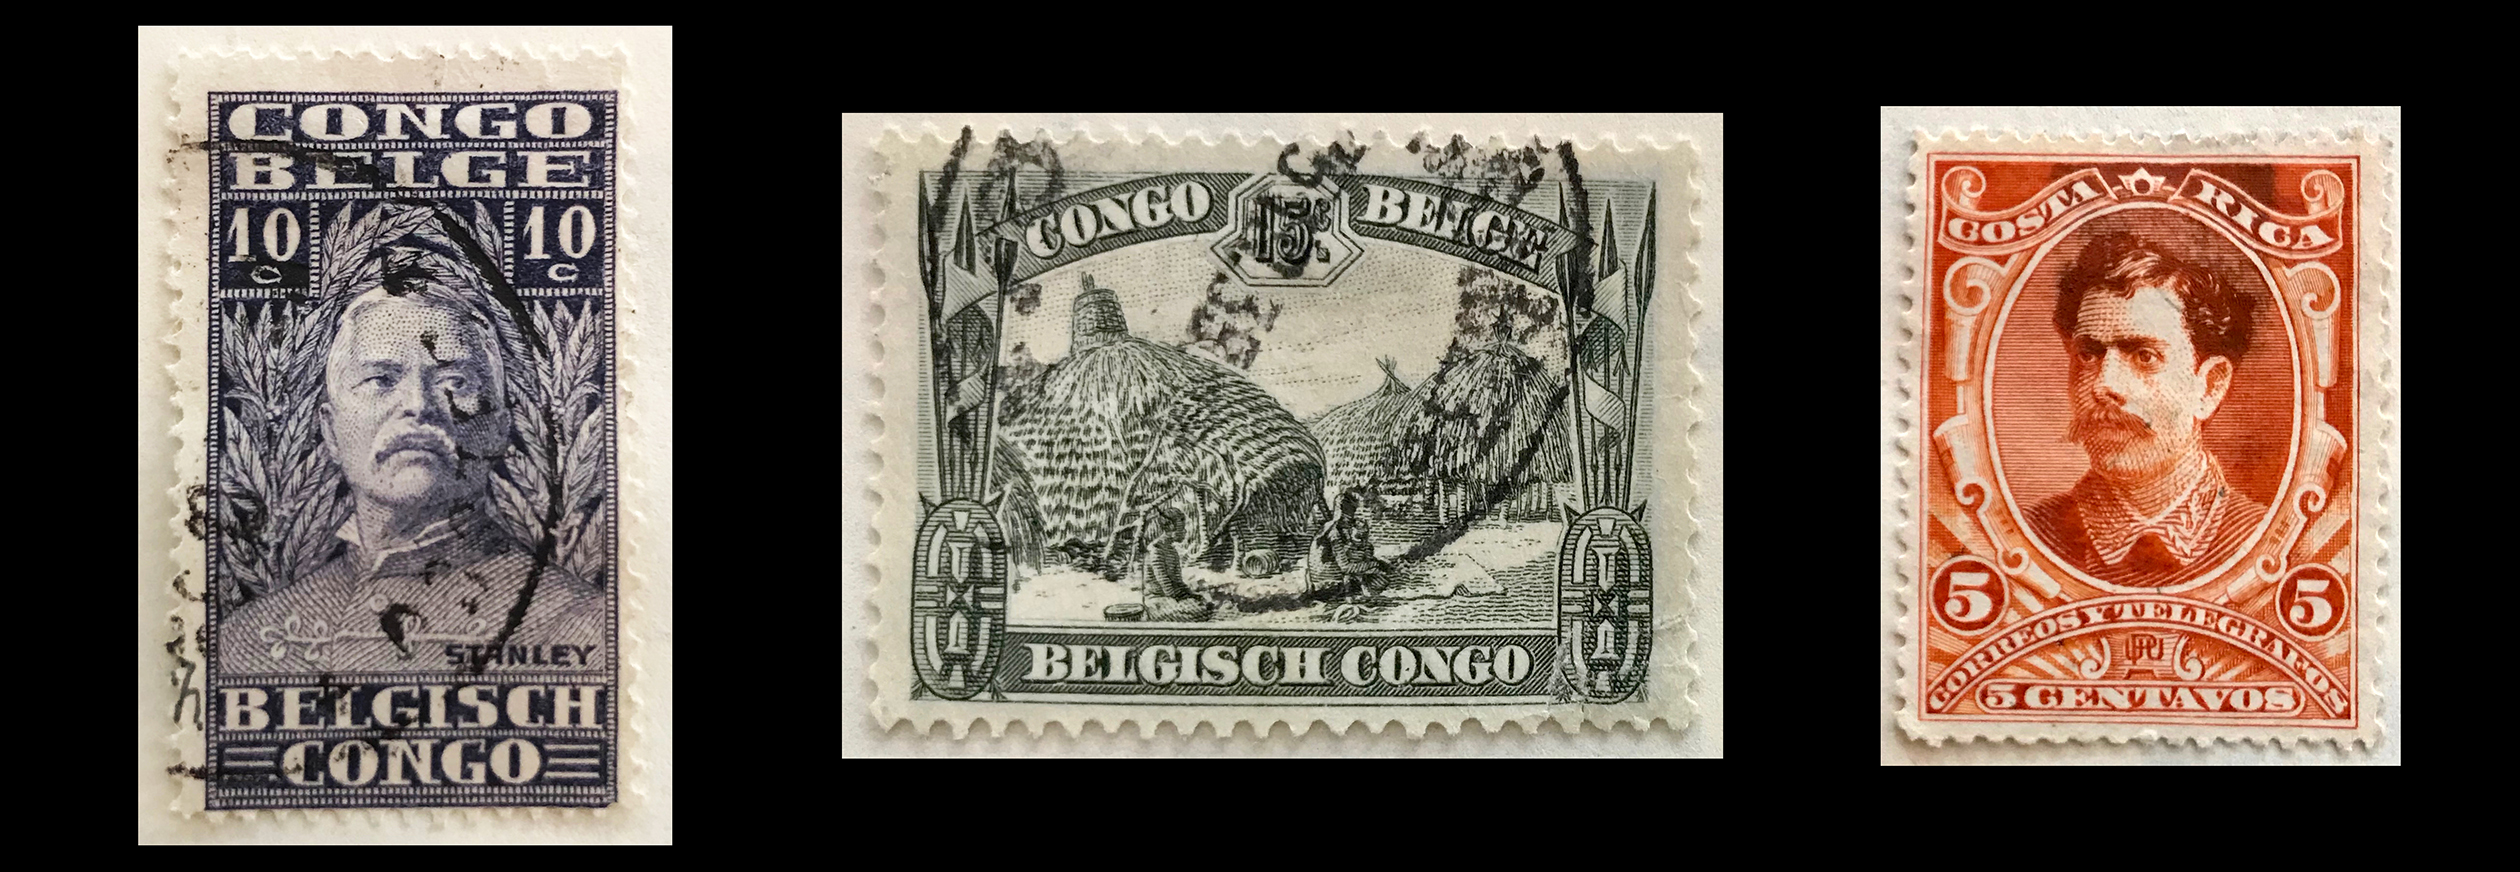 Postage stamps were once engraved in the banknote style, here are three examples: (Left) Sir Henry Morton Stanley famous for his central Africa missionary and explorer David Livingstone. (Middle) 1931 – Kivu kraal, Belgian Congo. (Right) Ca. 1889, Costa Rica, Ramón Bernardo Soto Alfaro.